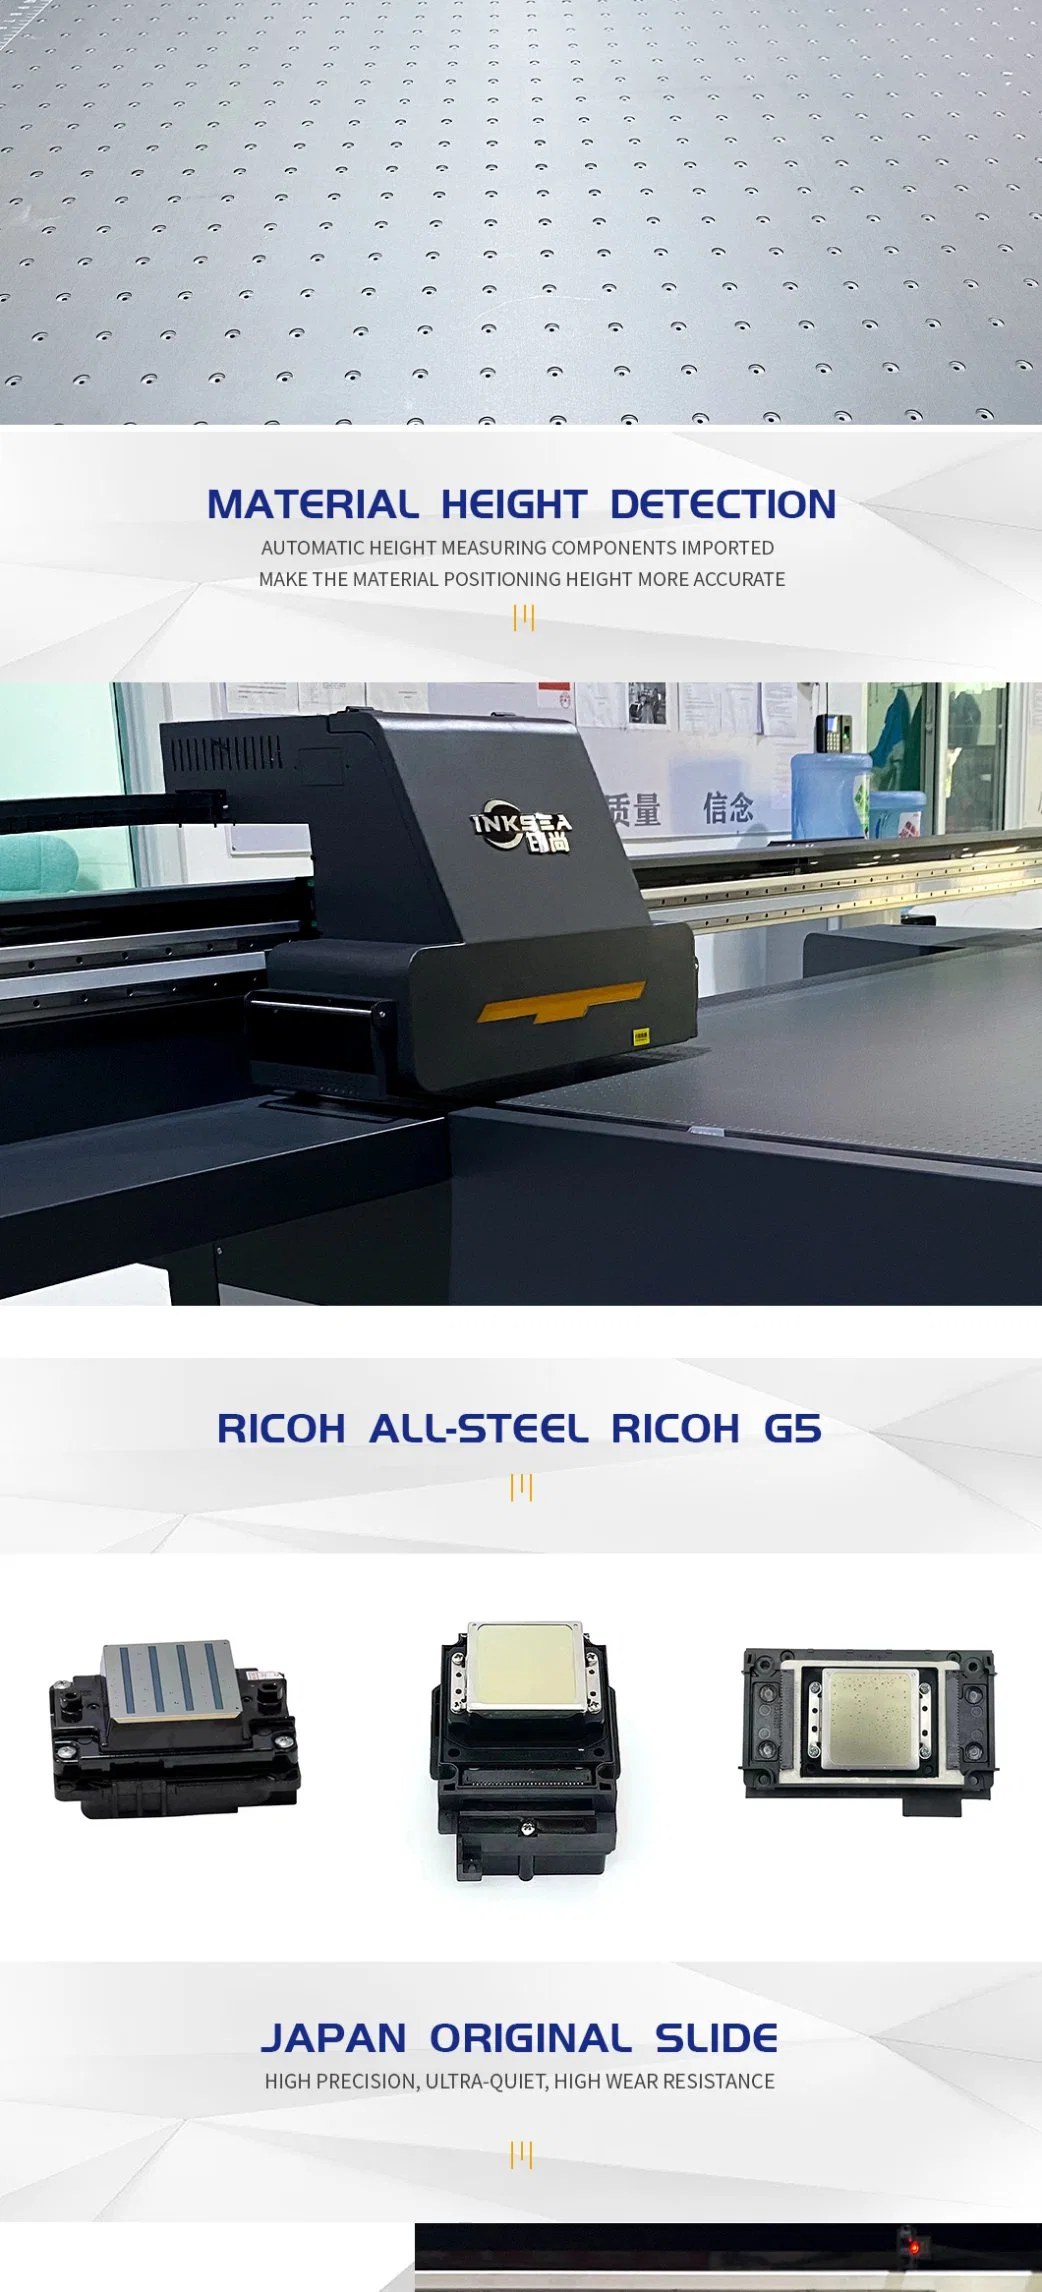 Large Format Printer 2.5m Size Digital Inkjet Printer with Ricoh G5 G5I Head for Wood and Glass Acrylic UV Flatbed Printers Solvent Flatbed Printer